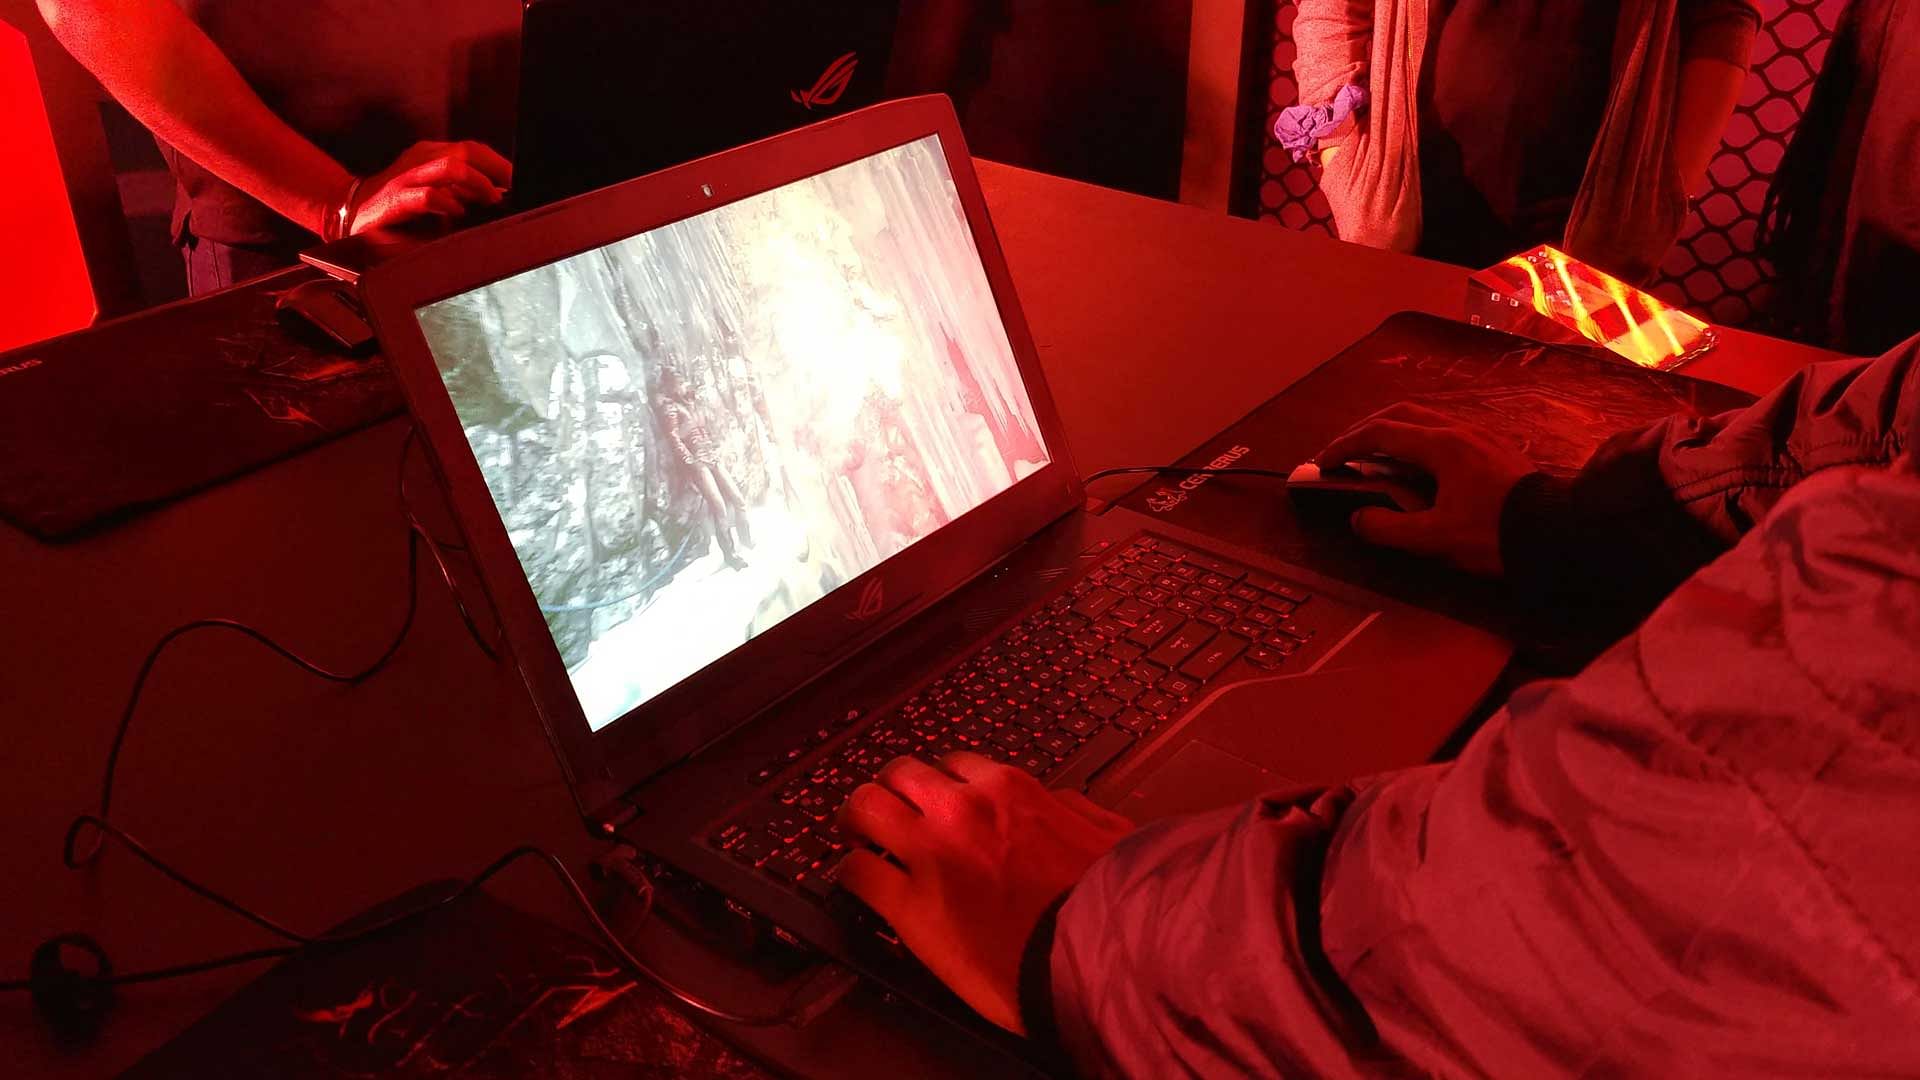 New ROG (Republic of Gaming) laptops launched in India